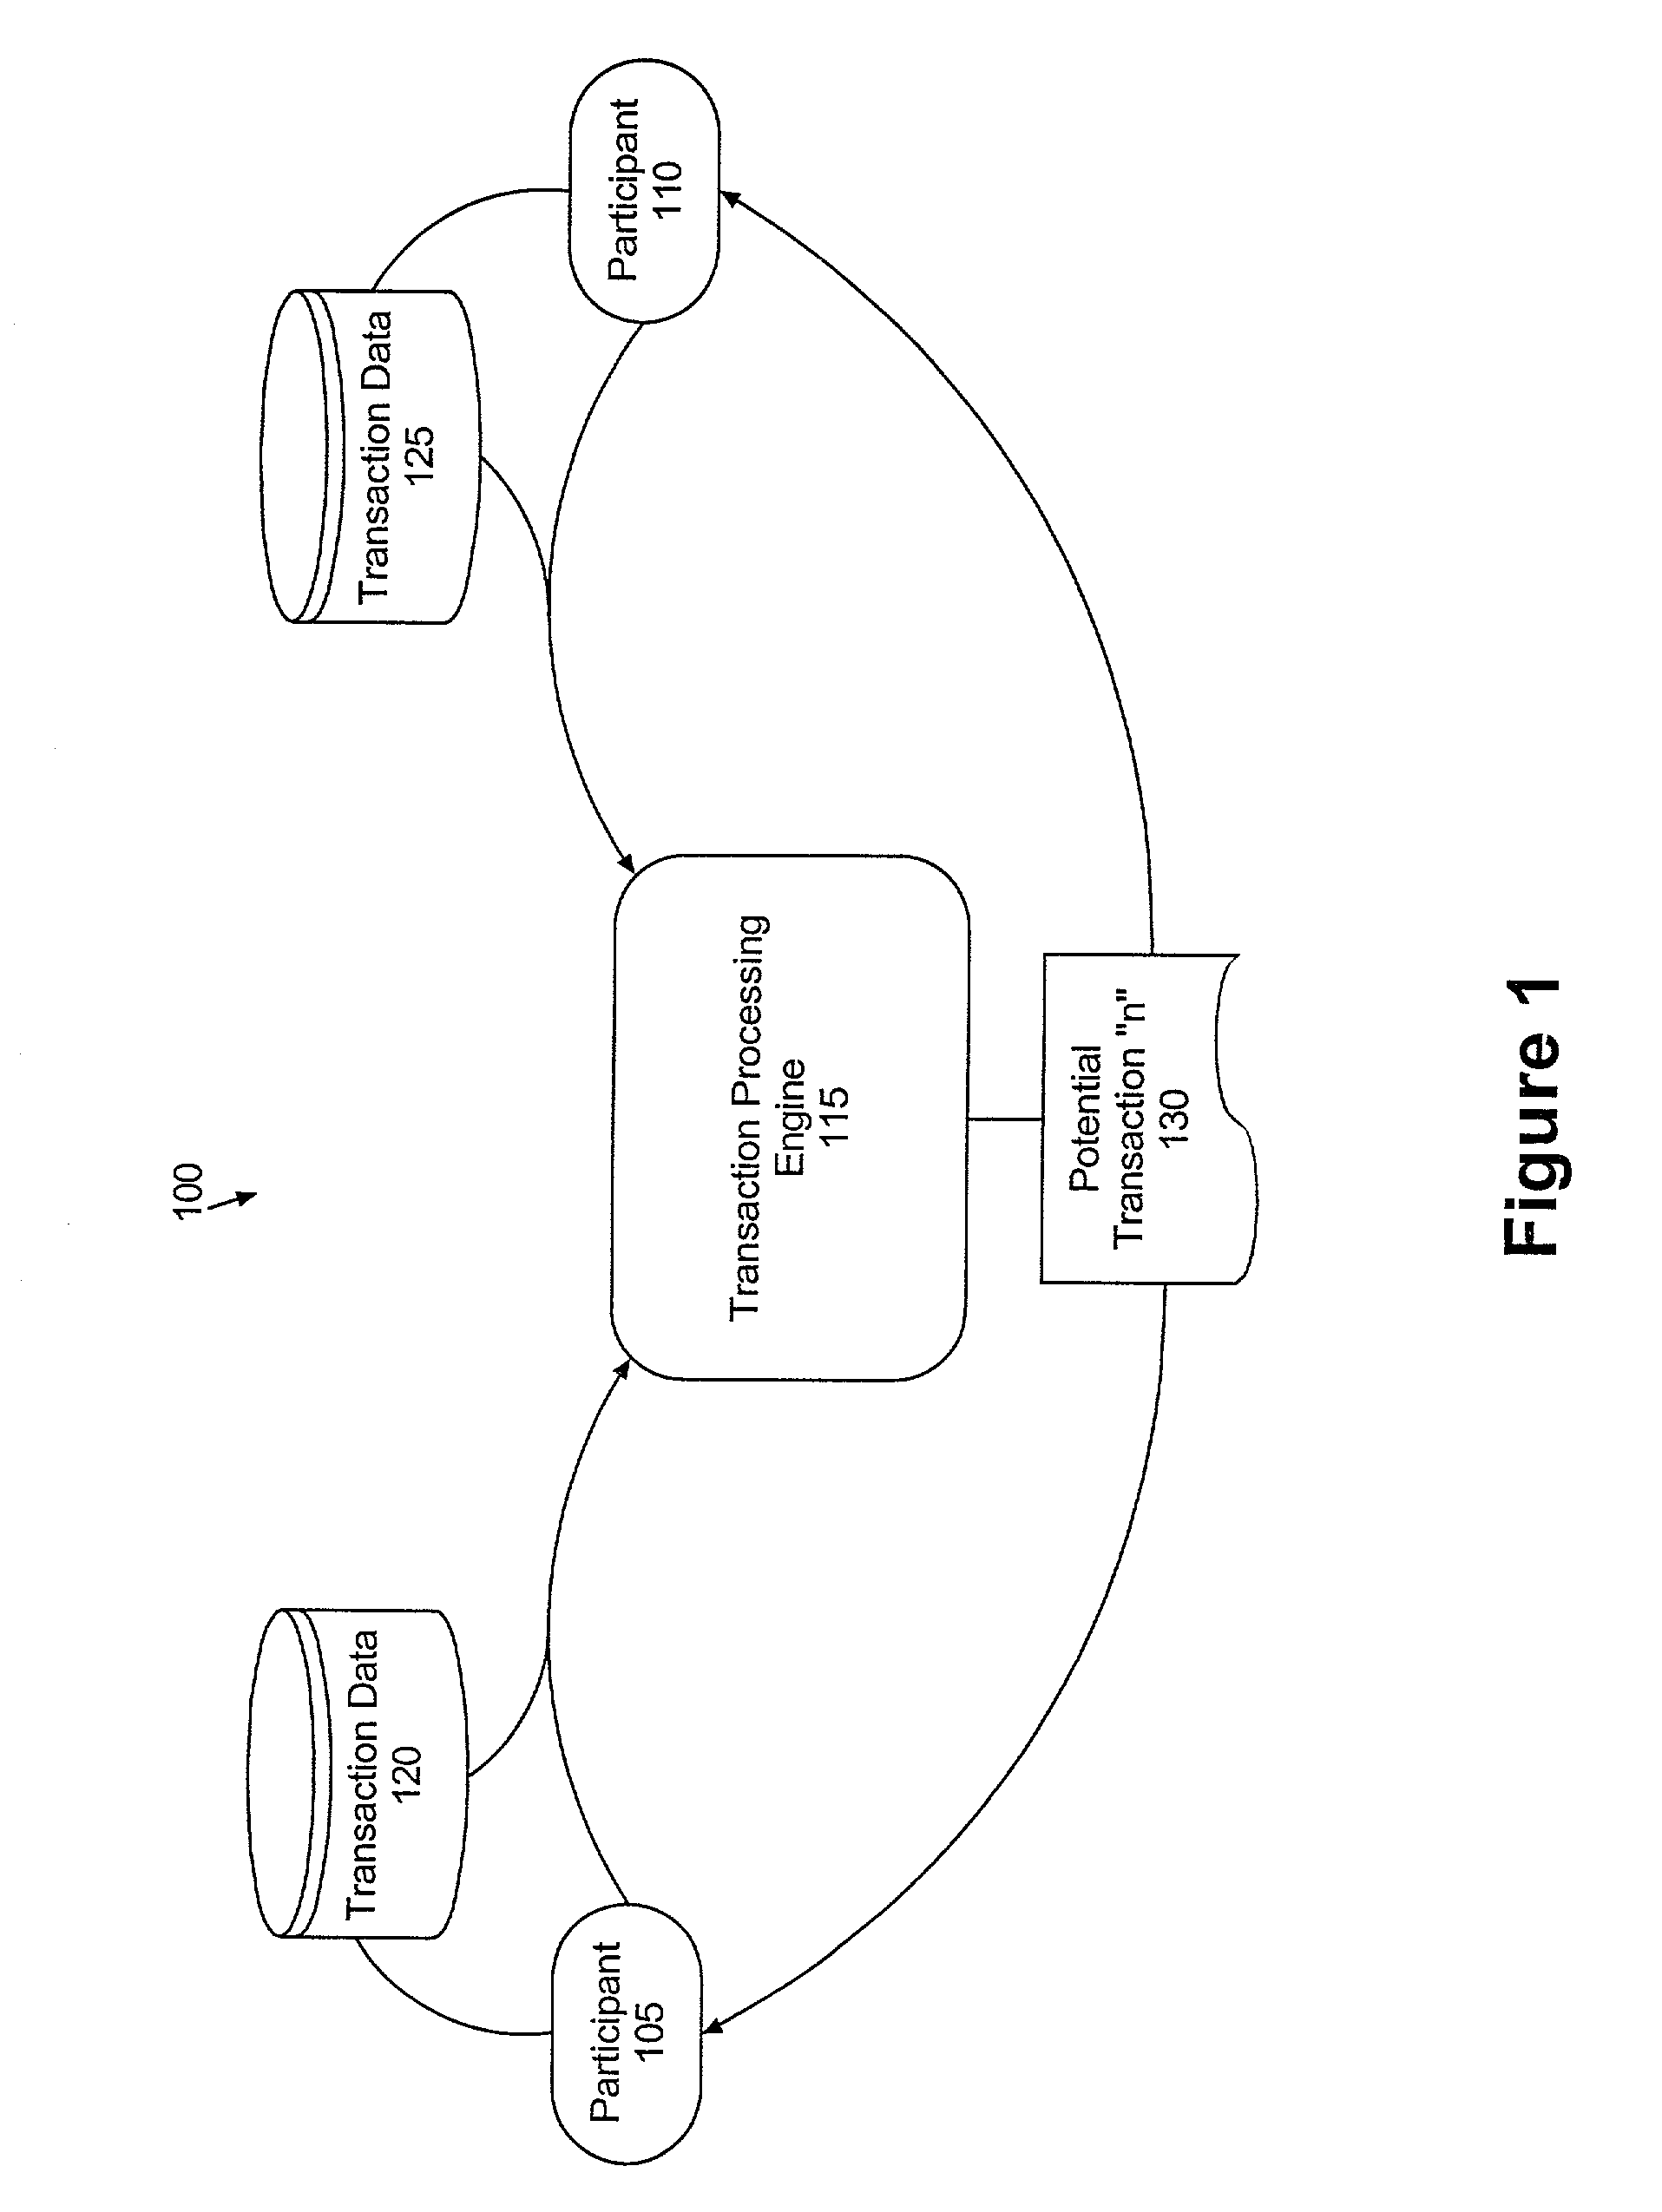 Method, system, and apparatus for dynamically creating electronic contracts